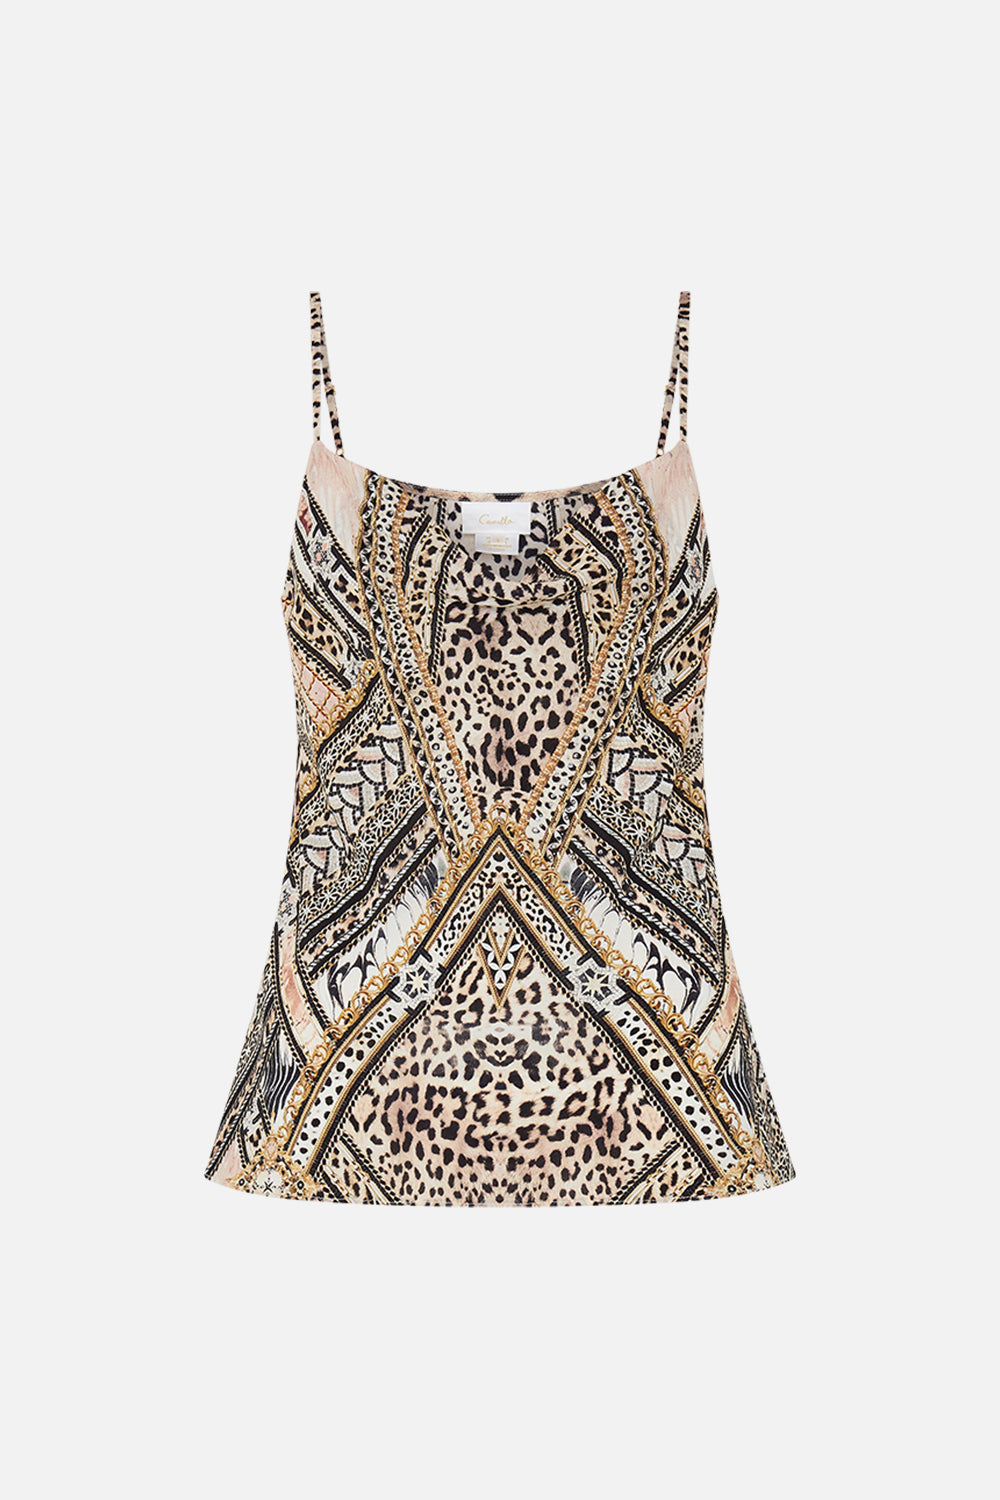 Product view of CAMILLA silk cami top in Mosaic Muse 